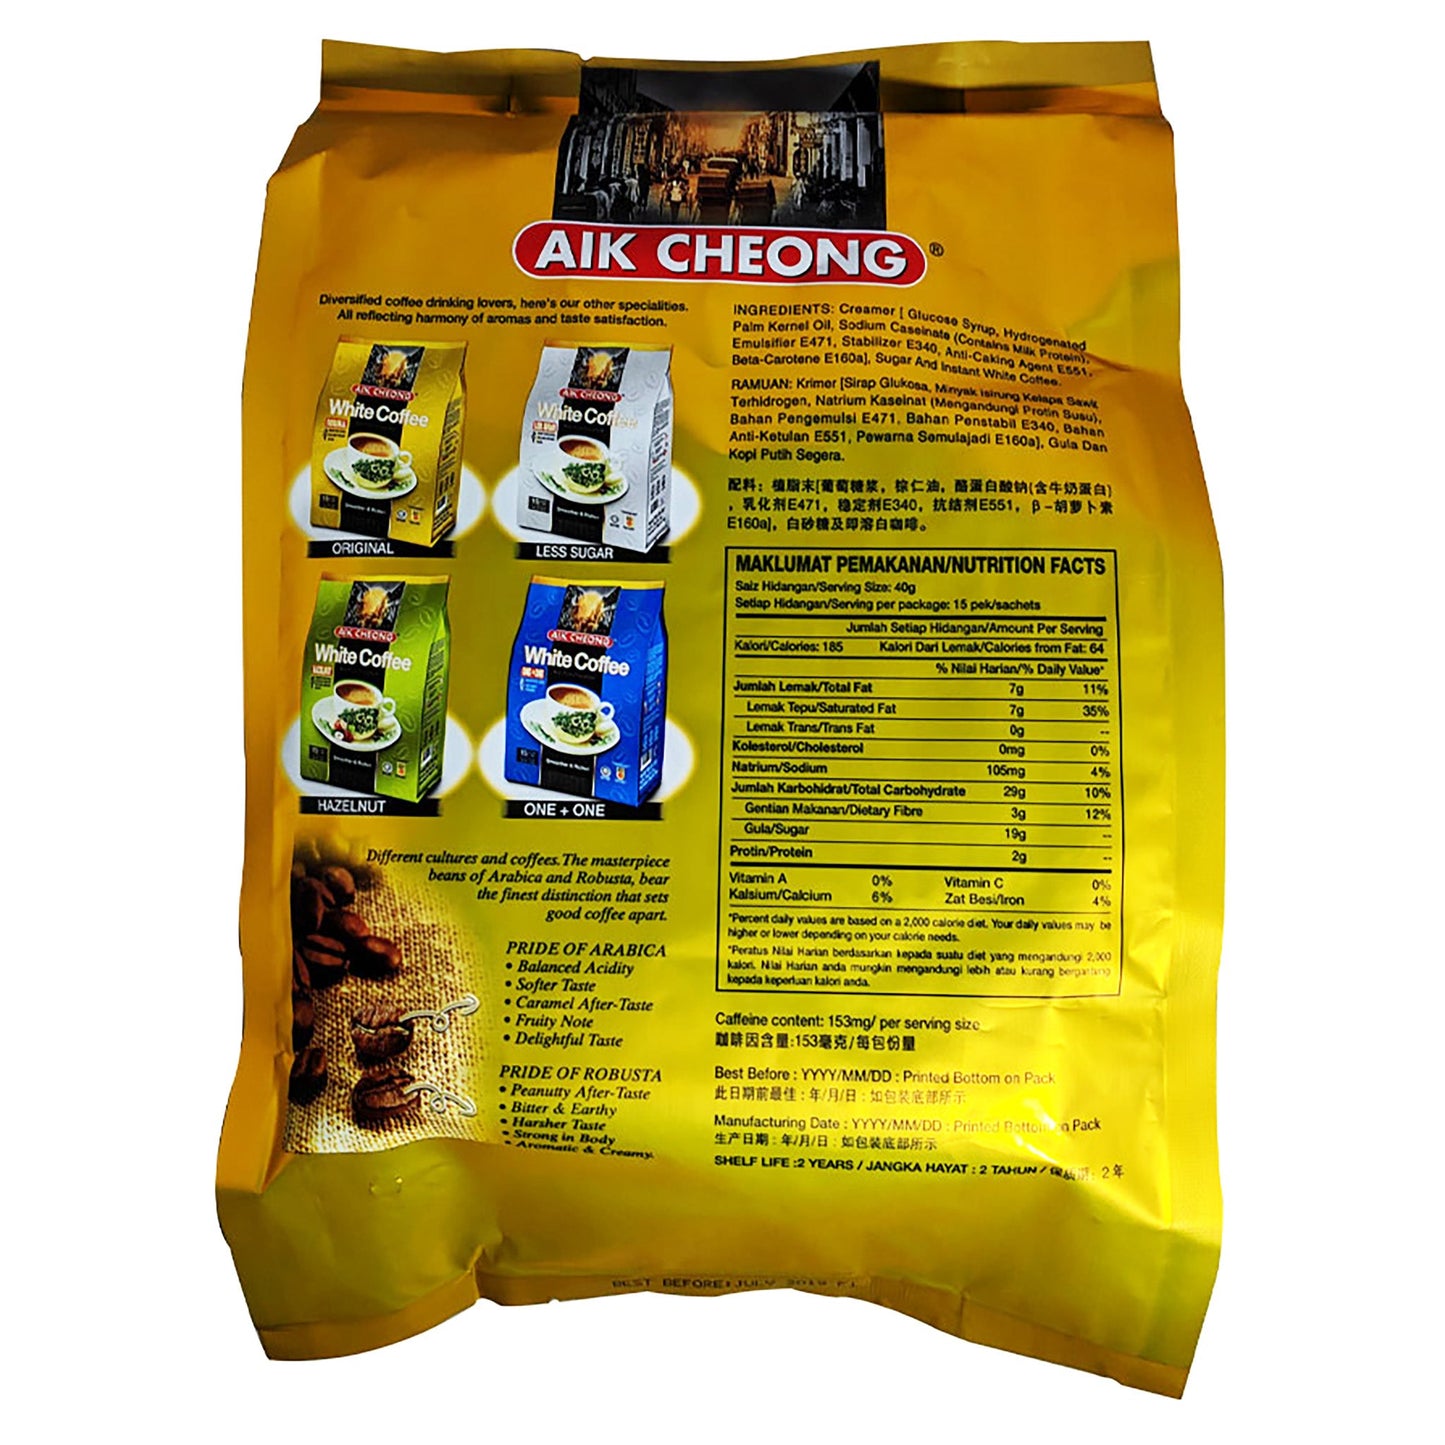 Back graphic image of Aik Cheong White Coffee Original Flavor 21.16oz